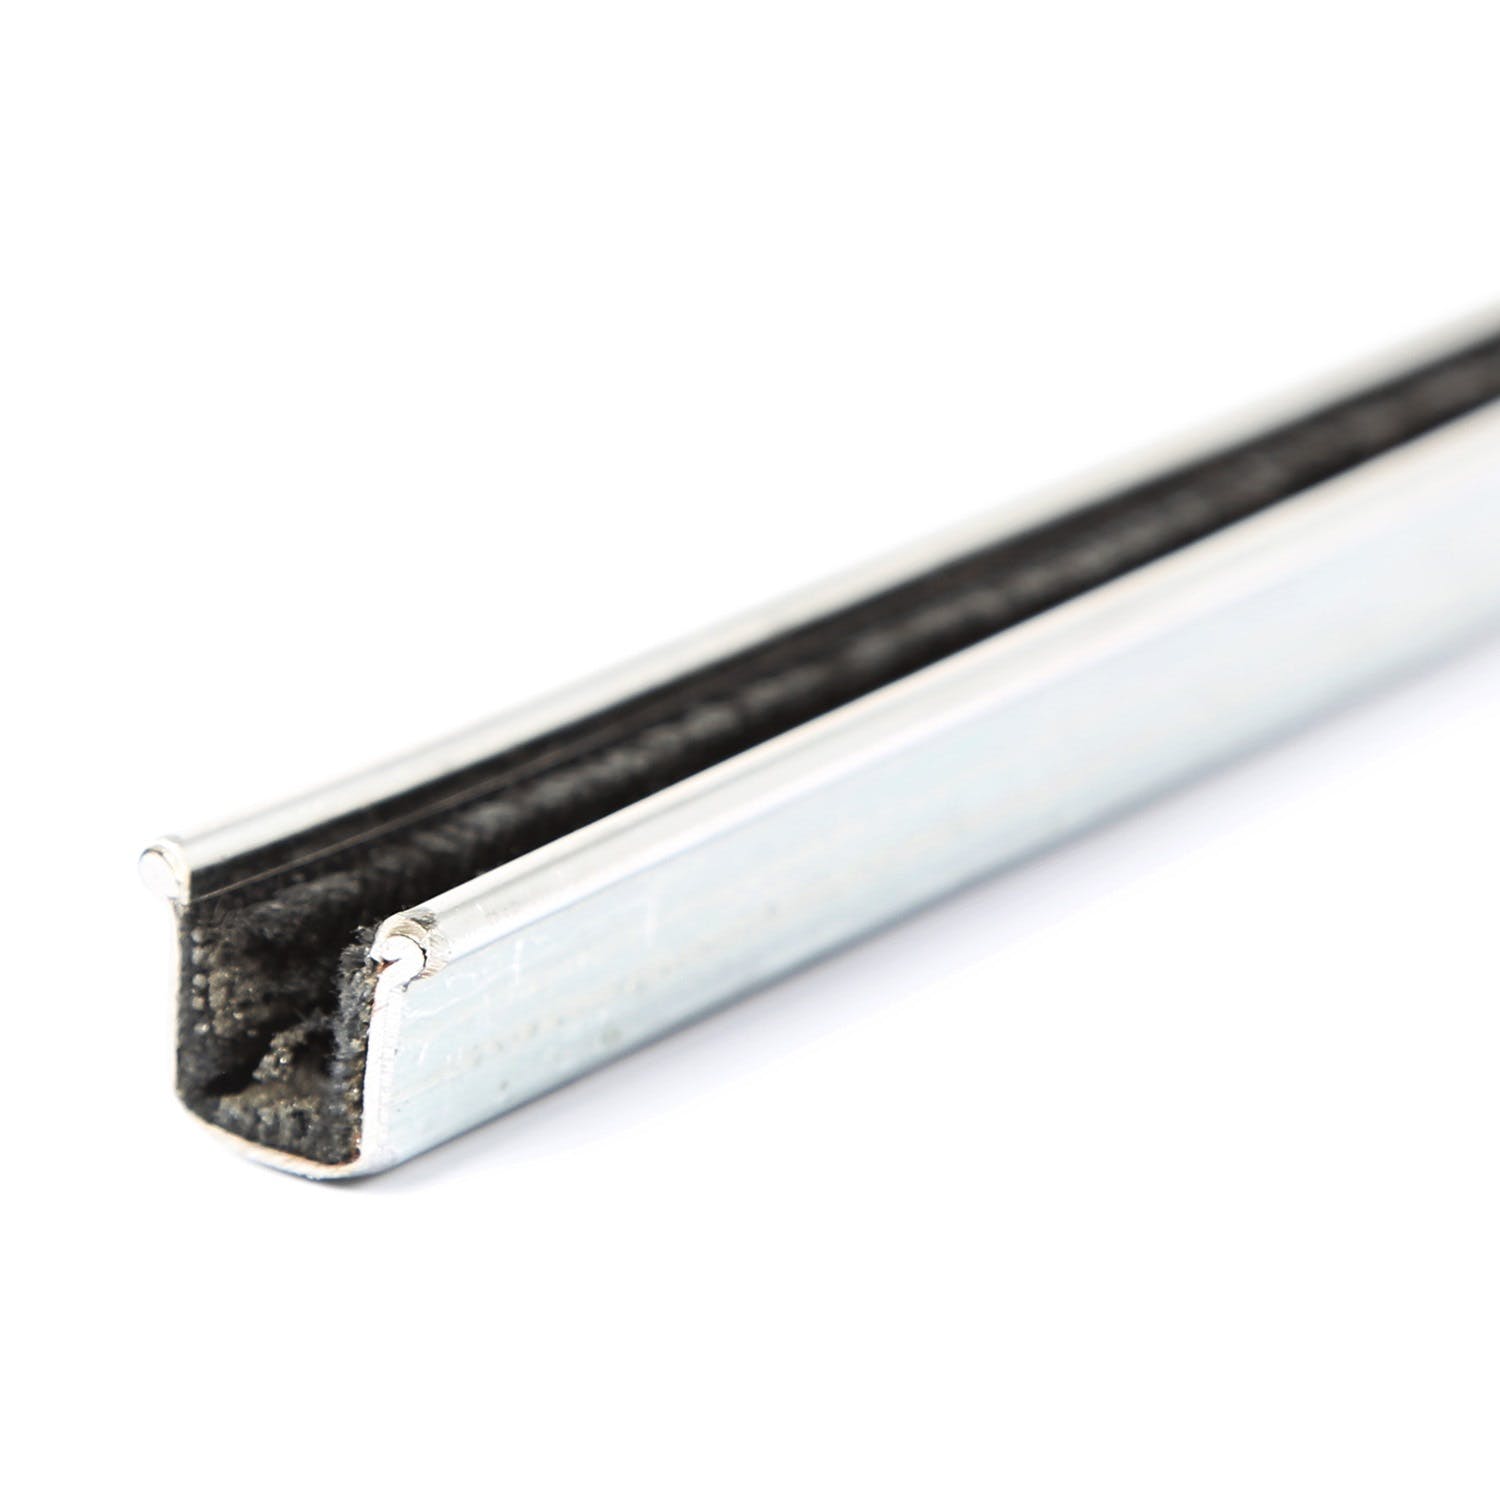 Omix-ADA 12303.98 Glass Run Division Bar, Rear Left or Right